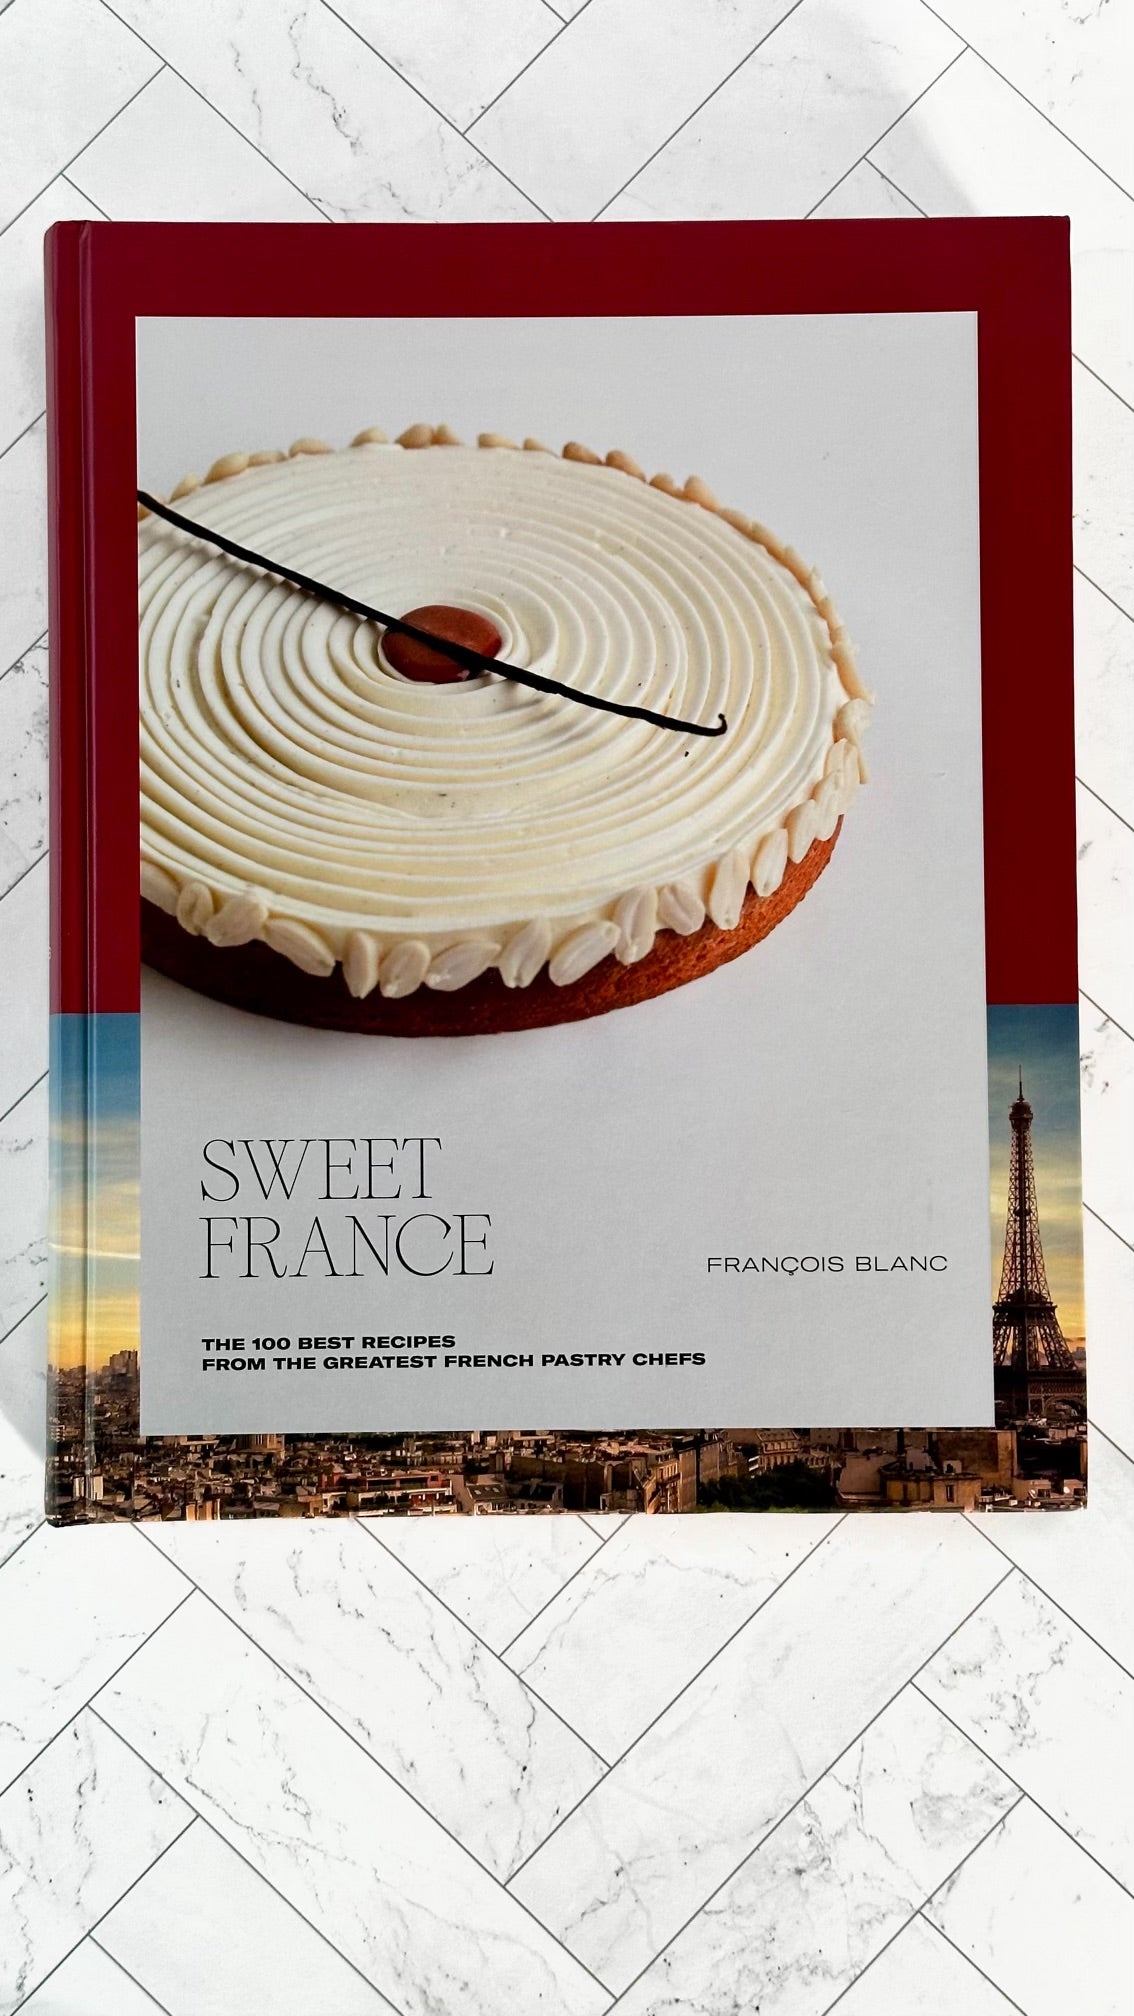 Sweet France: The 100 Best Recipes from the Greatest French Pastry Chefs